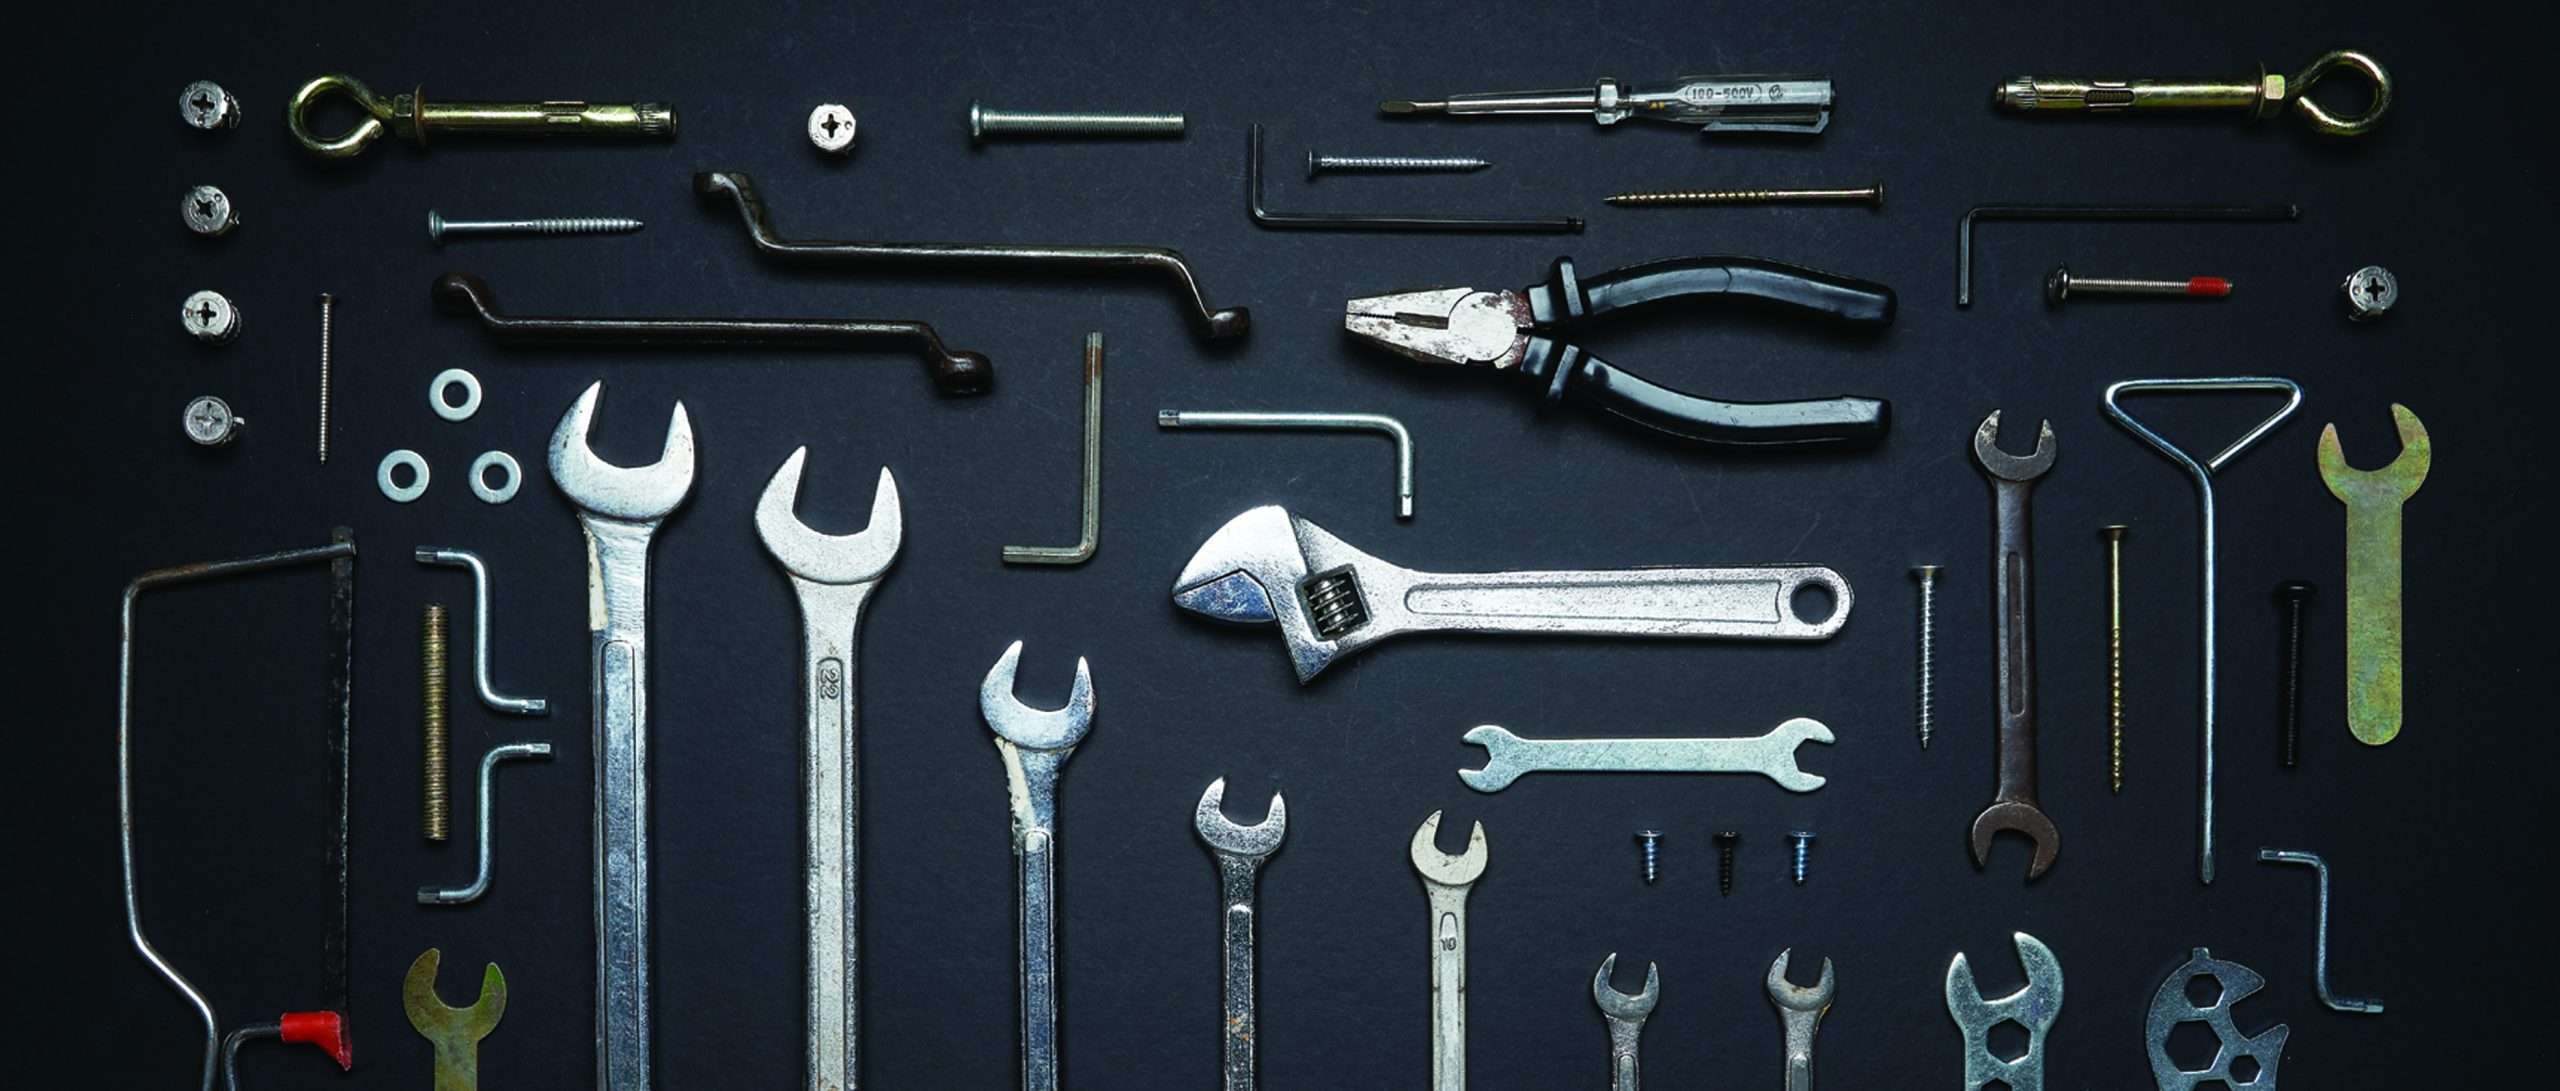 The 10 Essential Automotive Tools